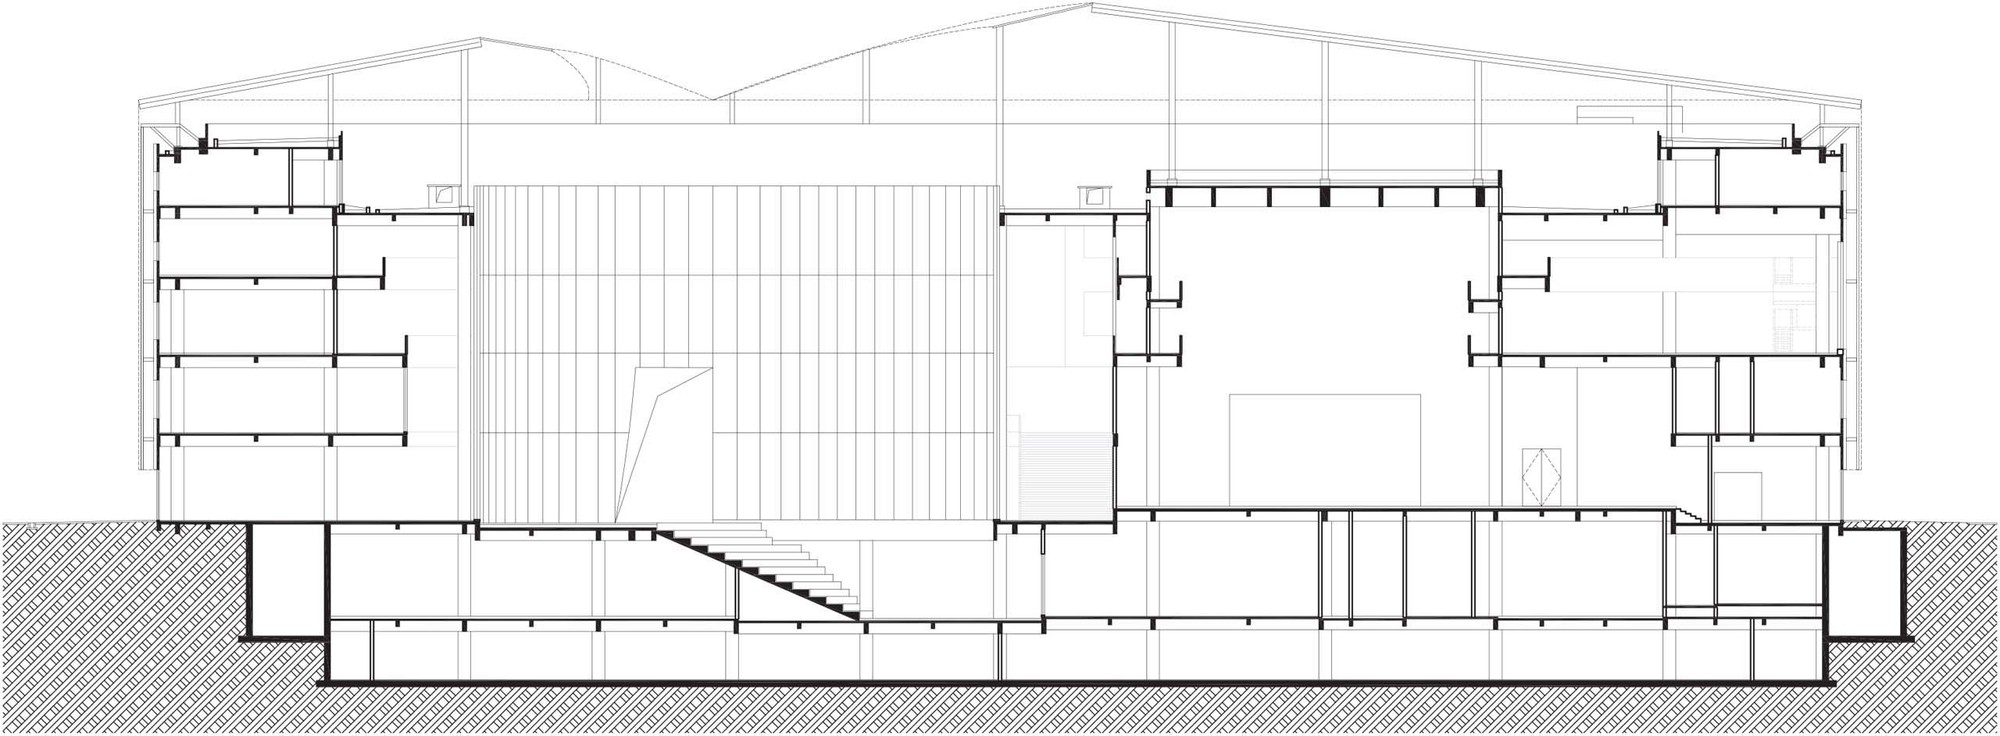 37_Baoan_Cultural_Complex_-_Drawing_–_Youth_Centre_Section.jpg